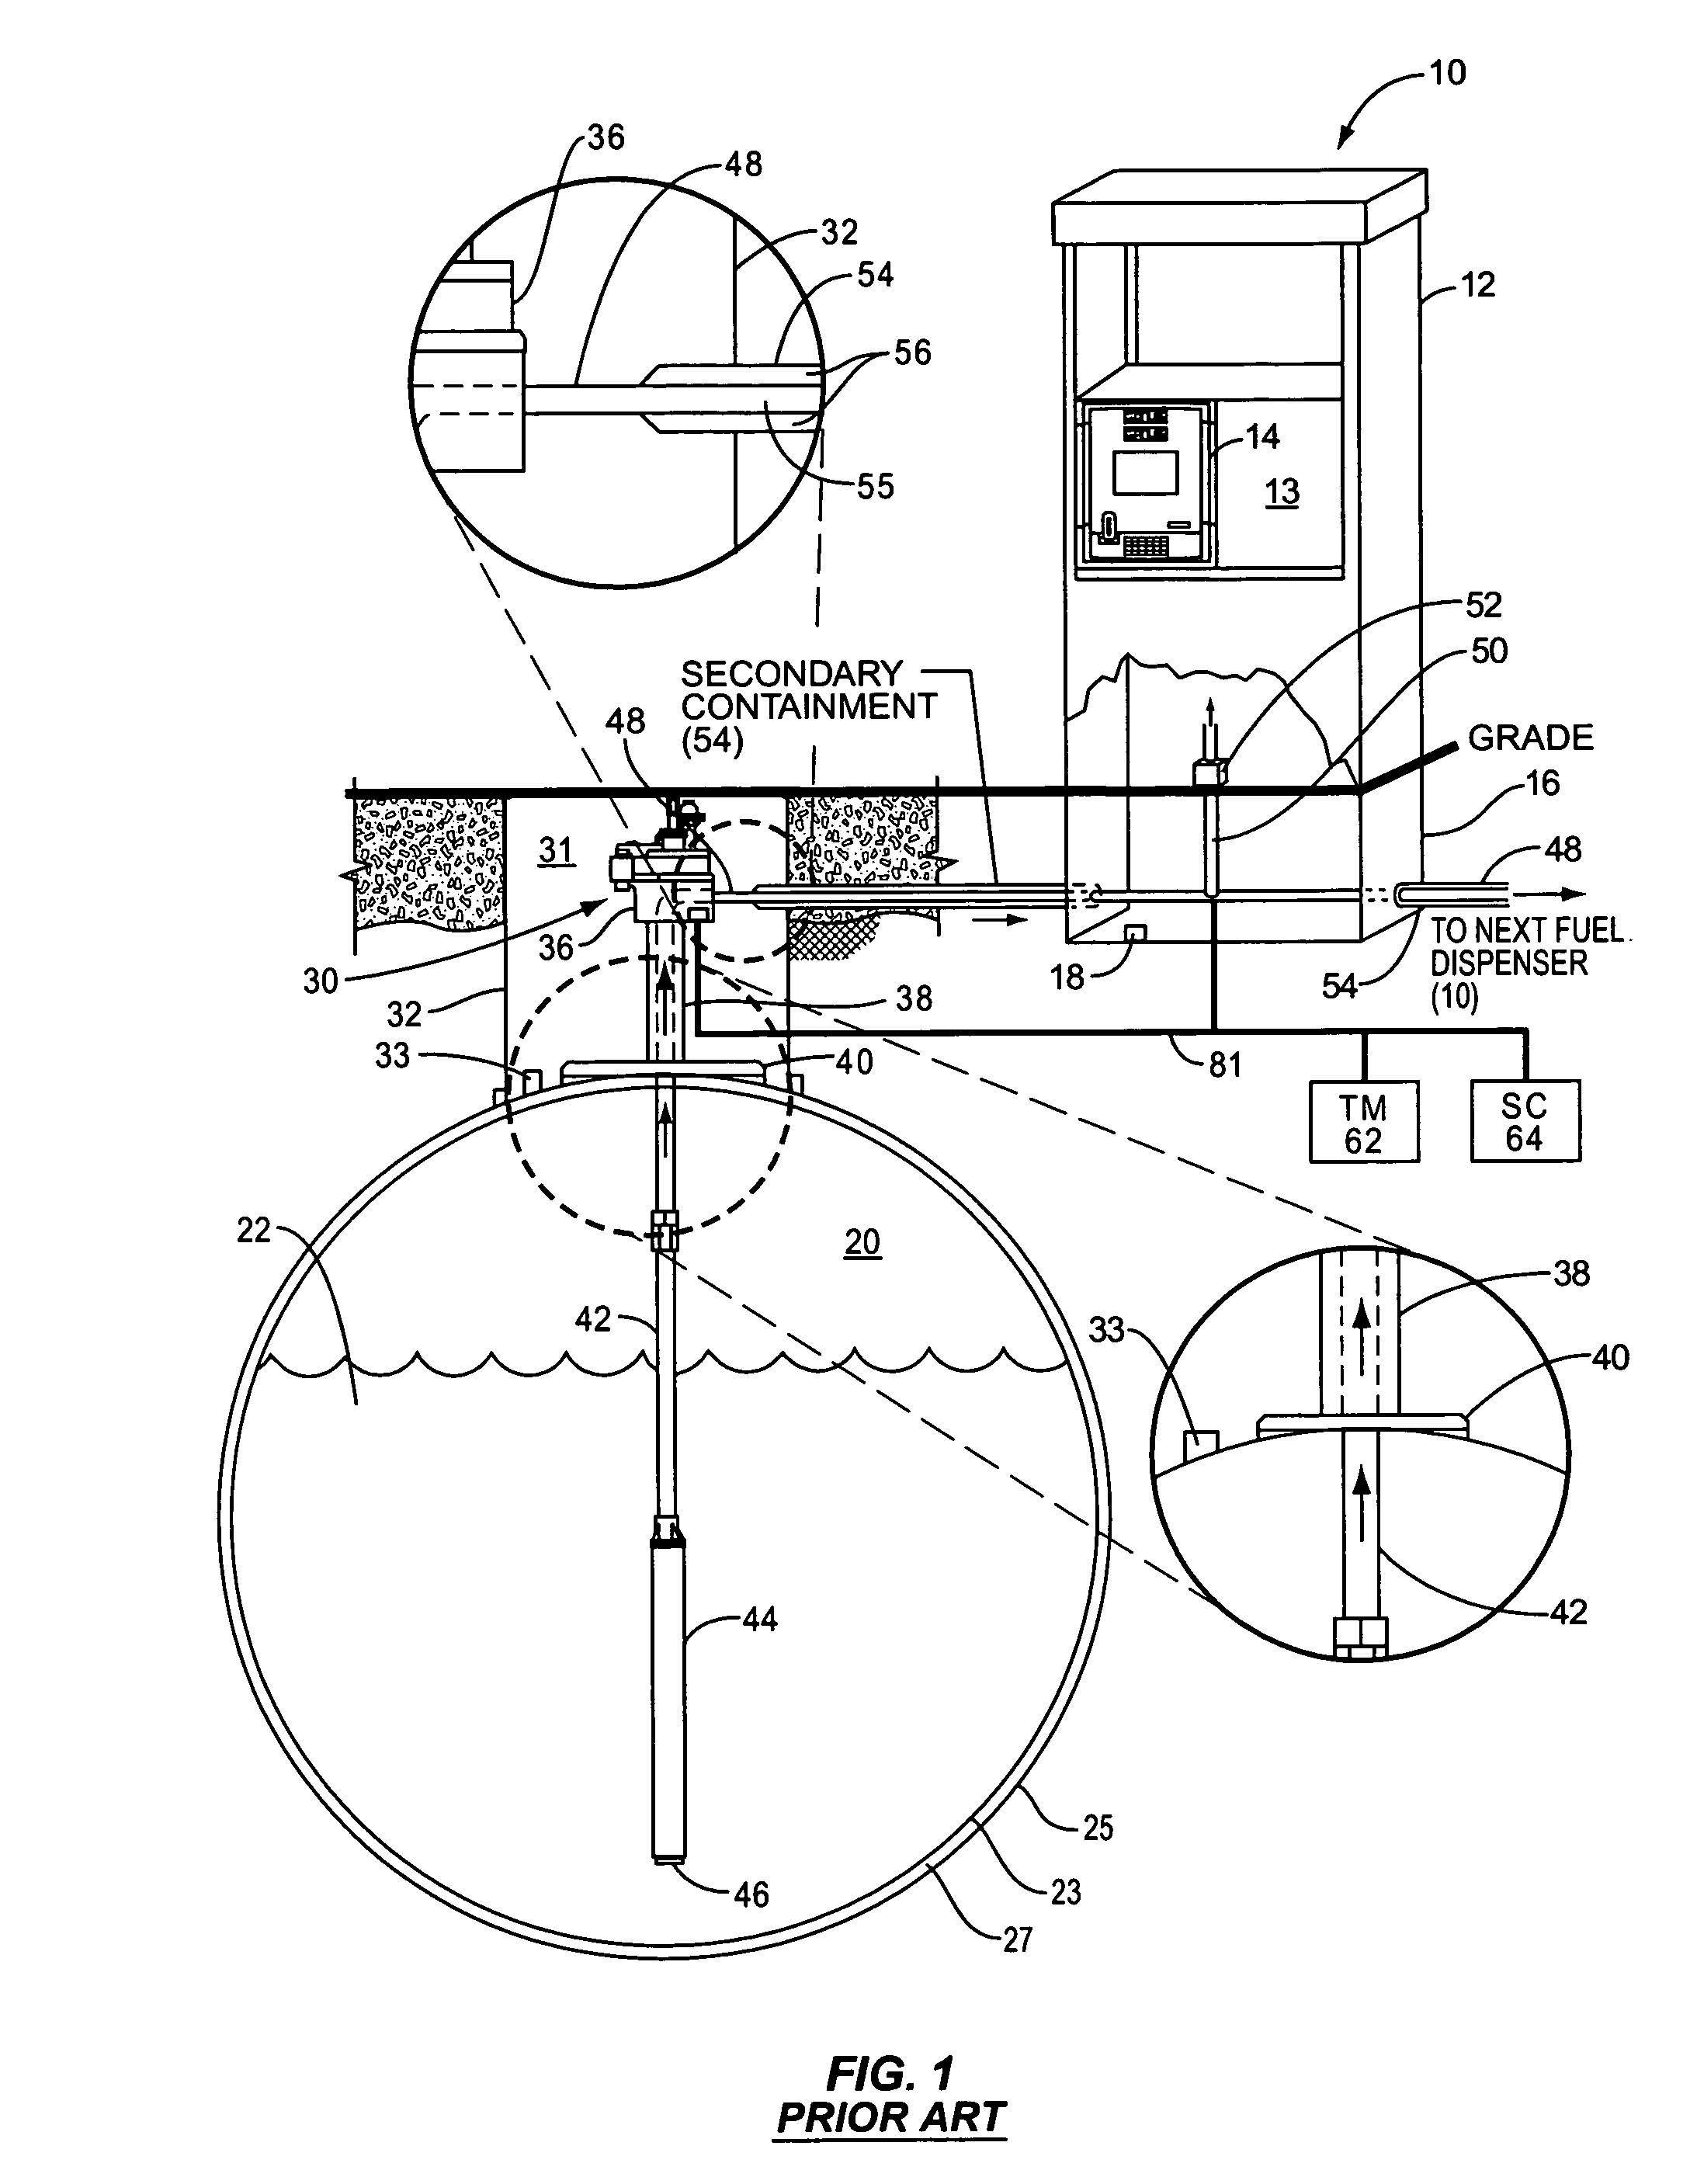 Secondary containment leak prevention and detection system and method